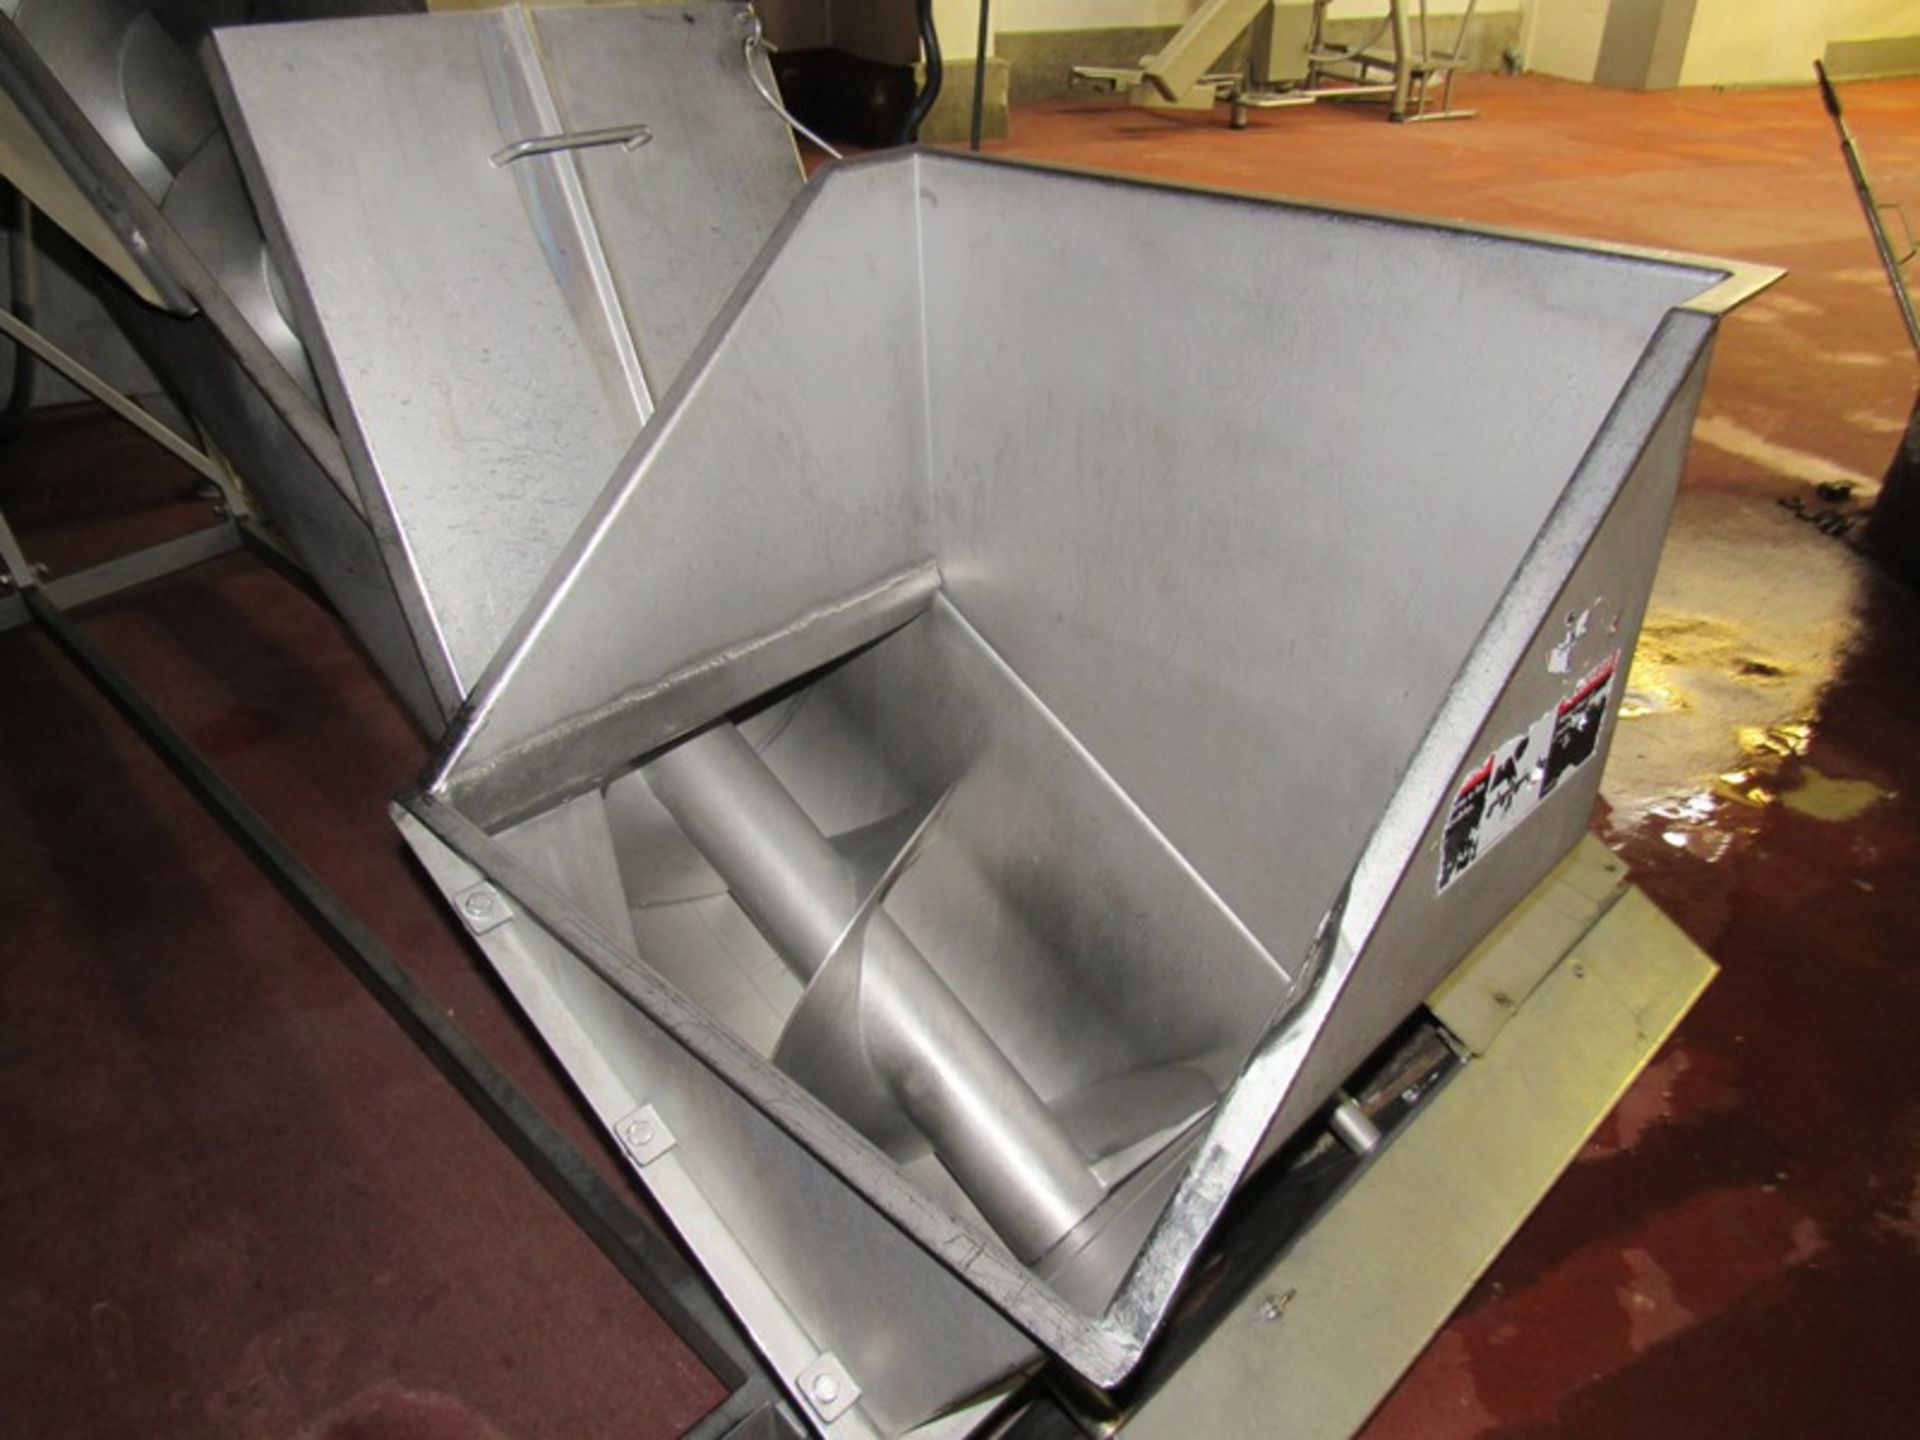 Wolfking Portable Stainless Steel Screw Conveyor, 16" Dia. X 14' Long screw, 24" W X 26" L hopper, - Image 3 of 5